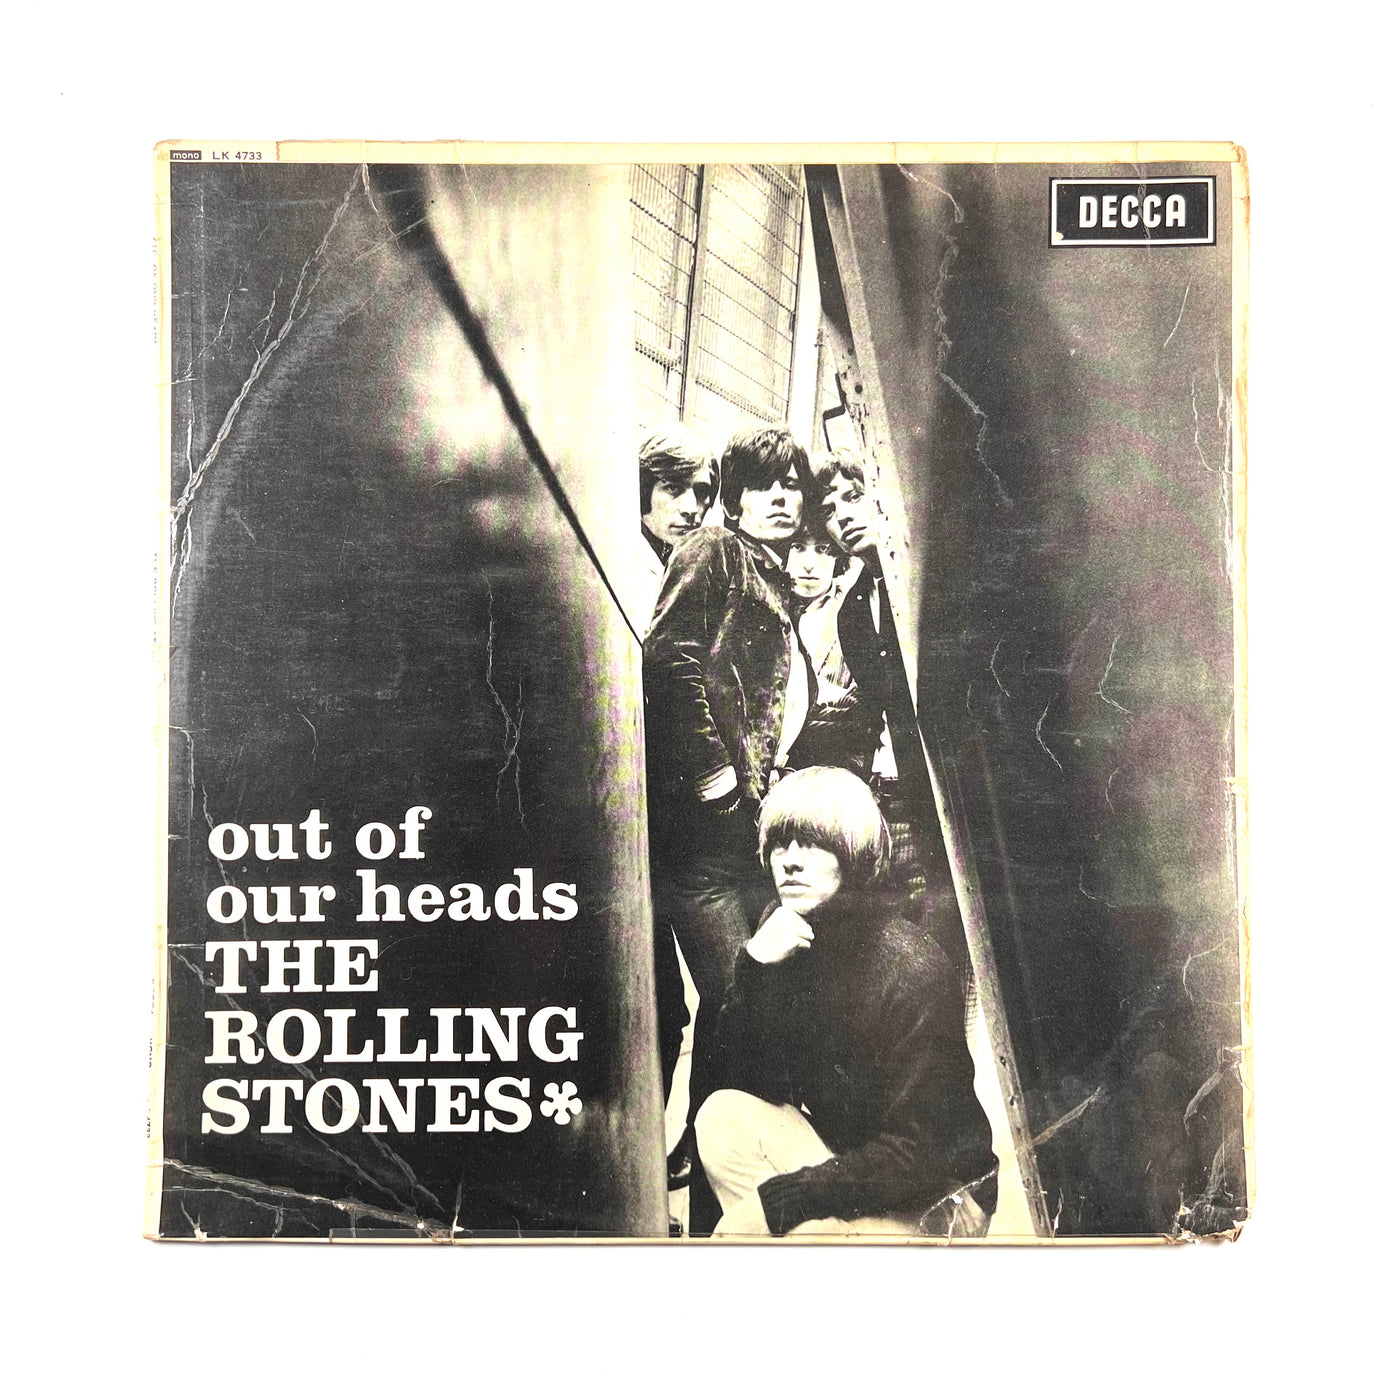 The Rolling Stones - Out Of Our Heads - 1965 Mono Press